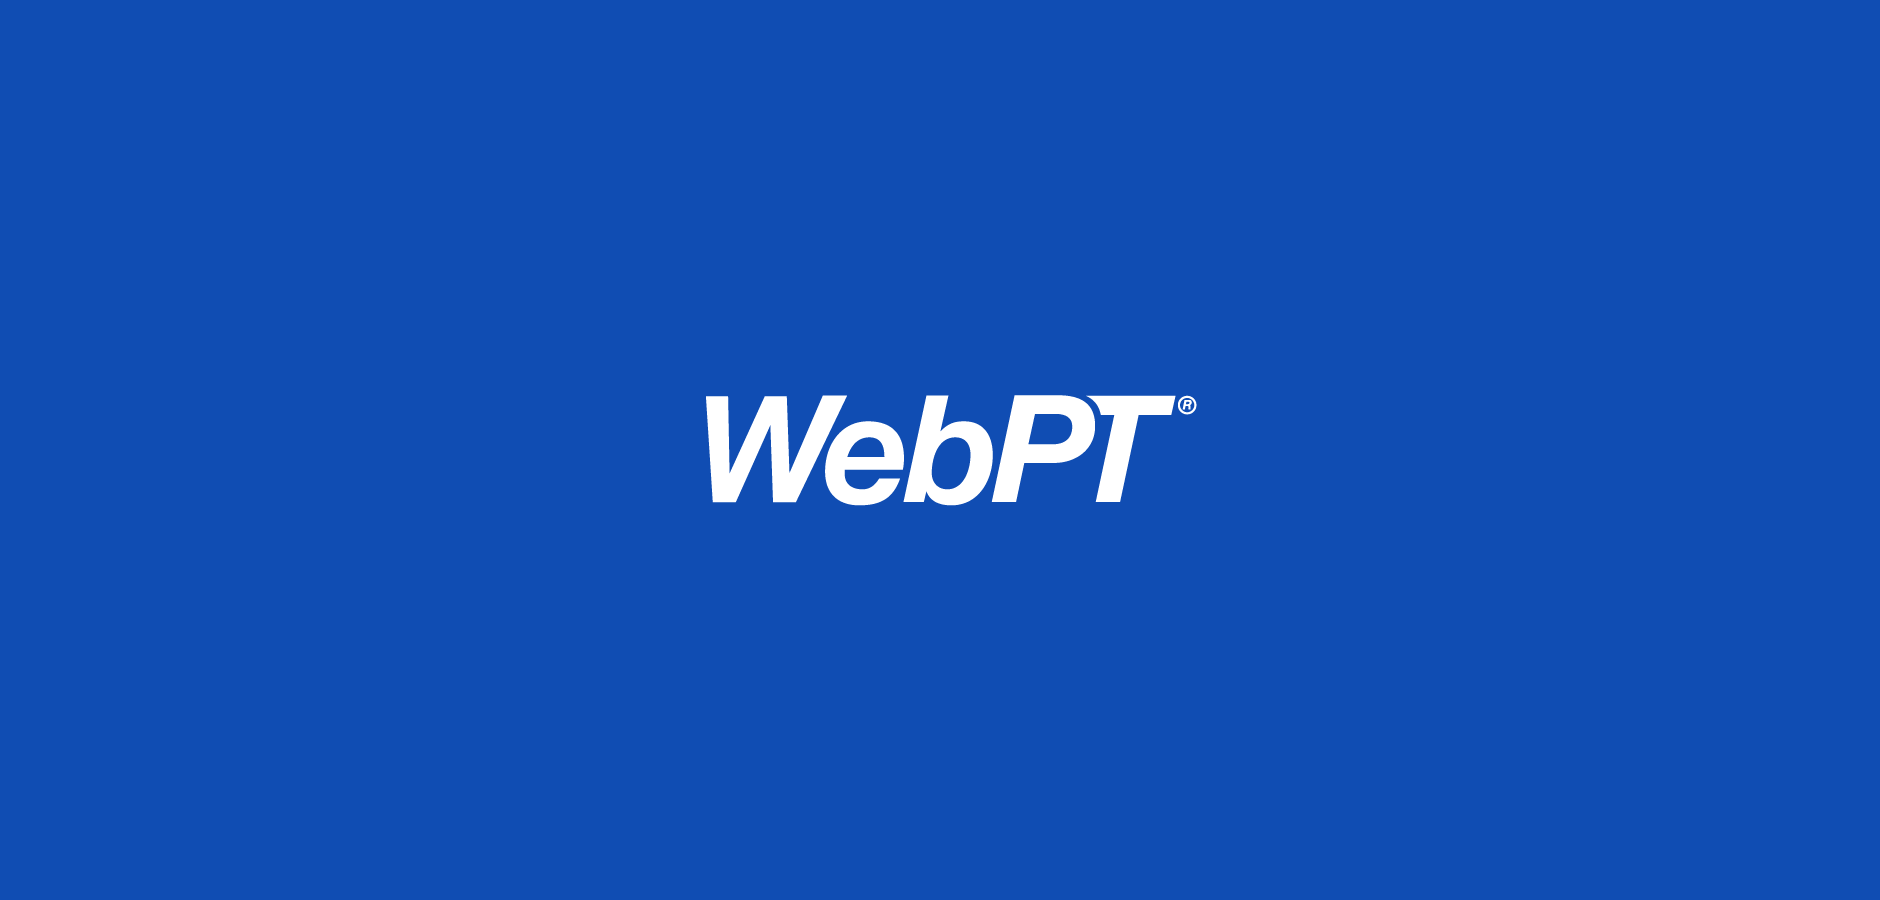 WebPT Earns Three Awards for Employee Satisfaction and Workplace Culture